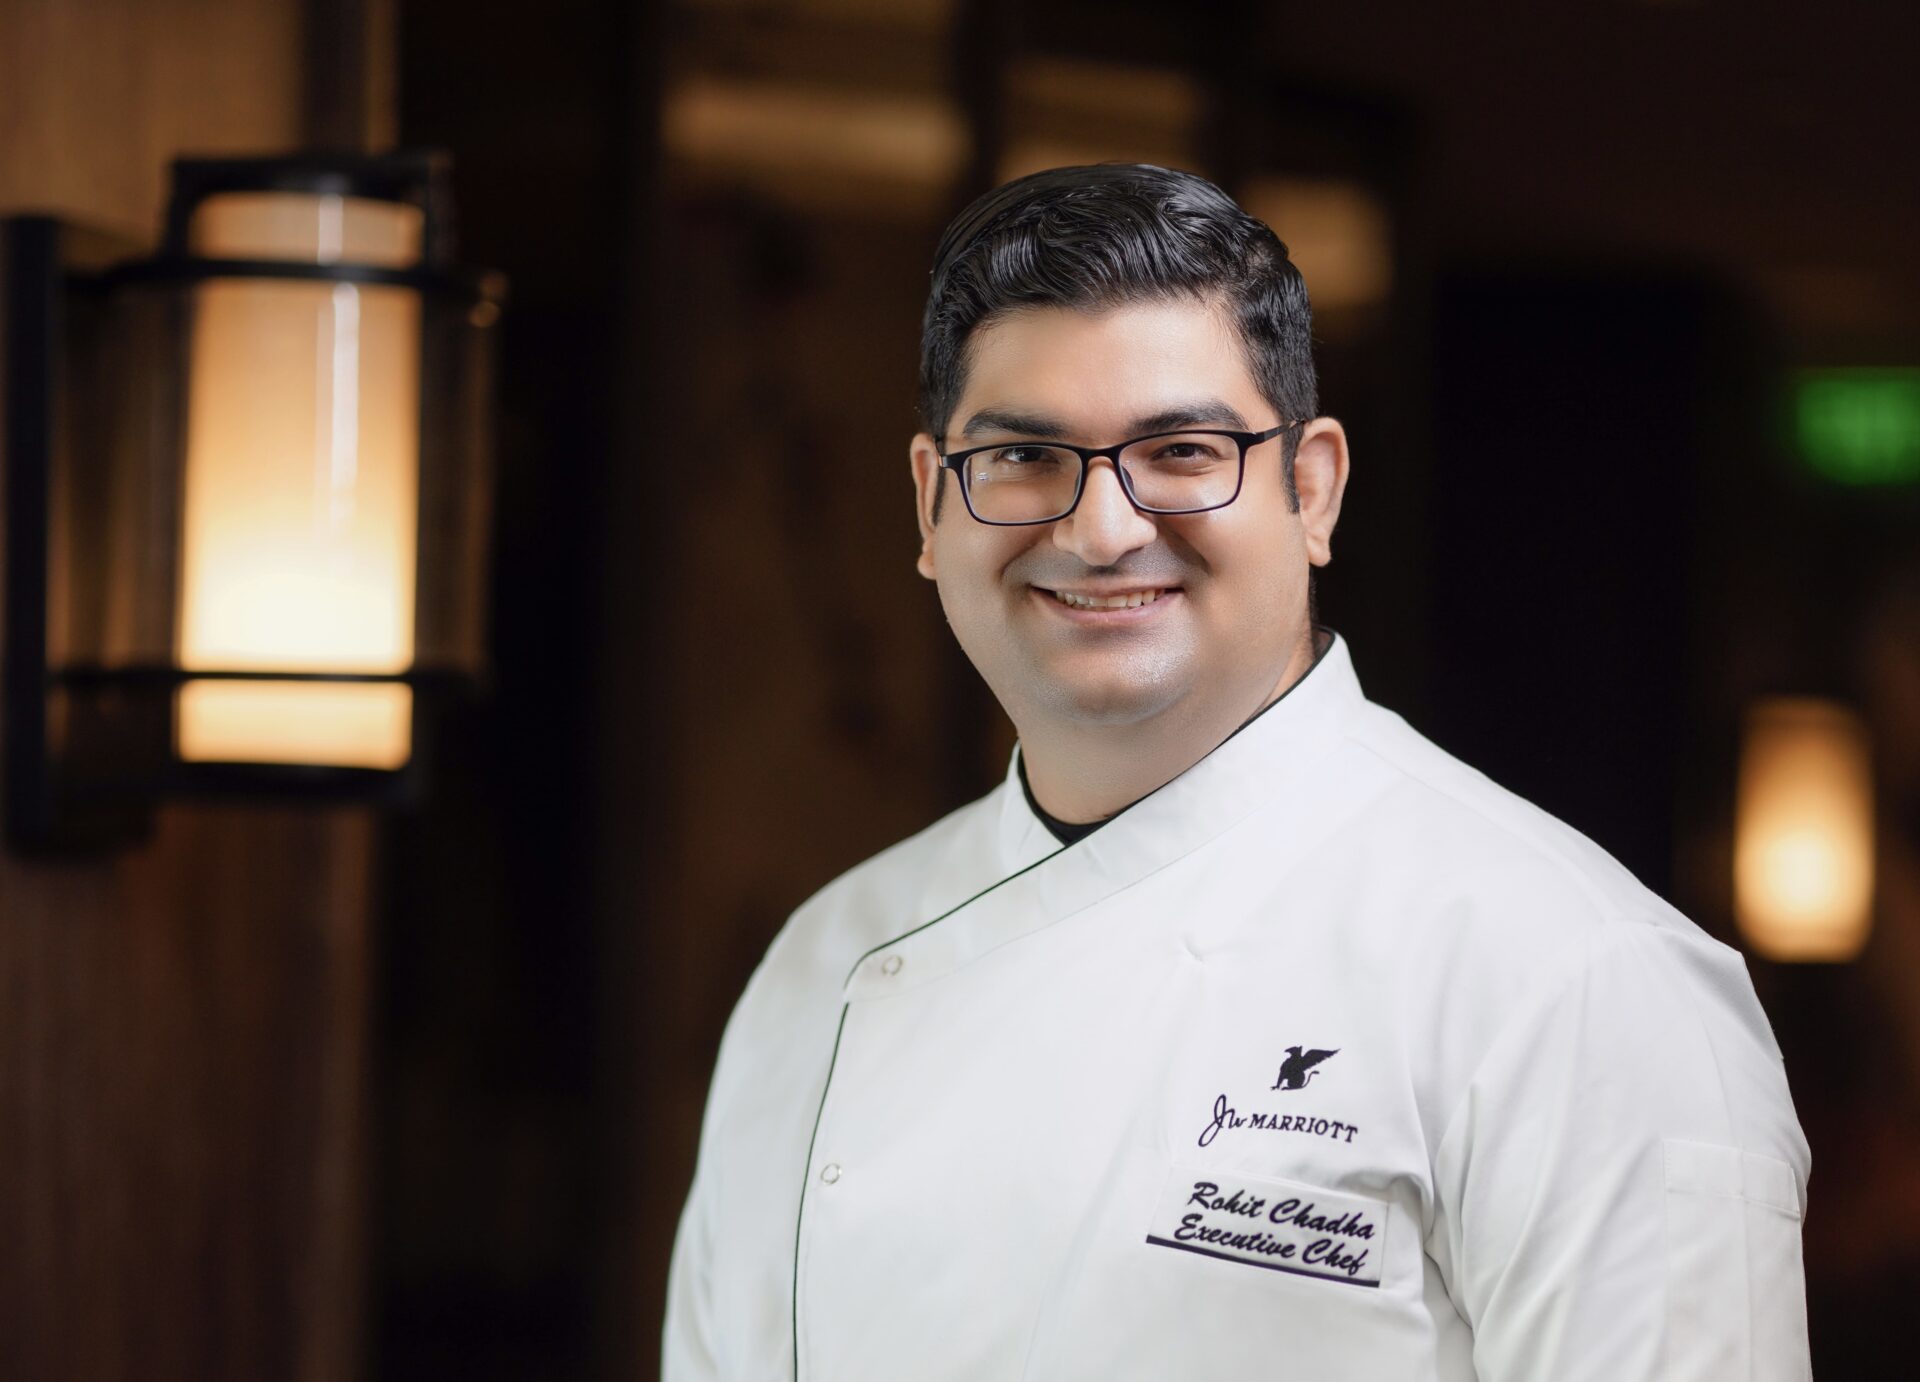 JW Marriott Mussoorie Walnut Grove Resort & Spa appoints Chef Rohit Chadha as the new Executive Chef